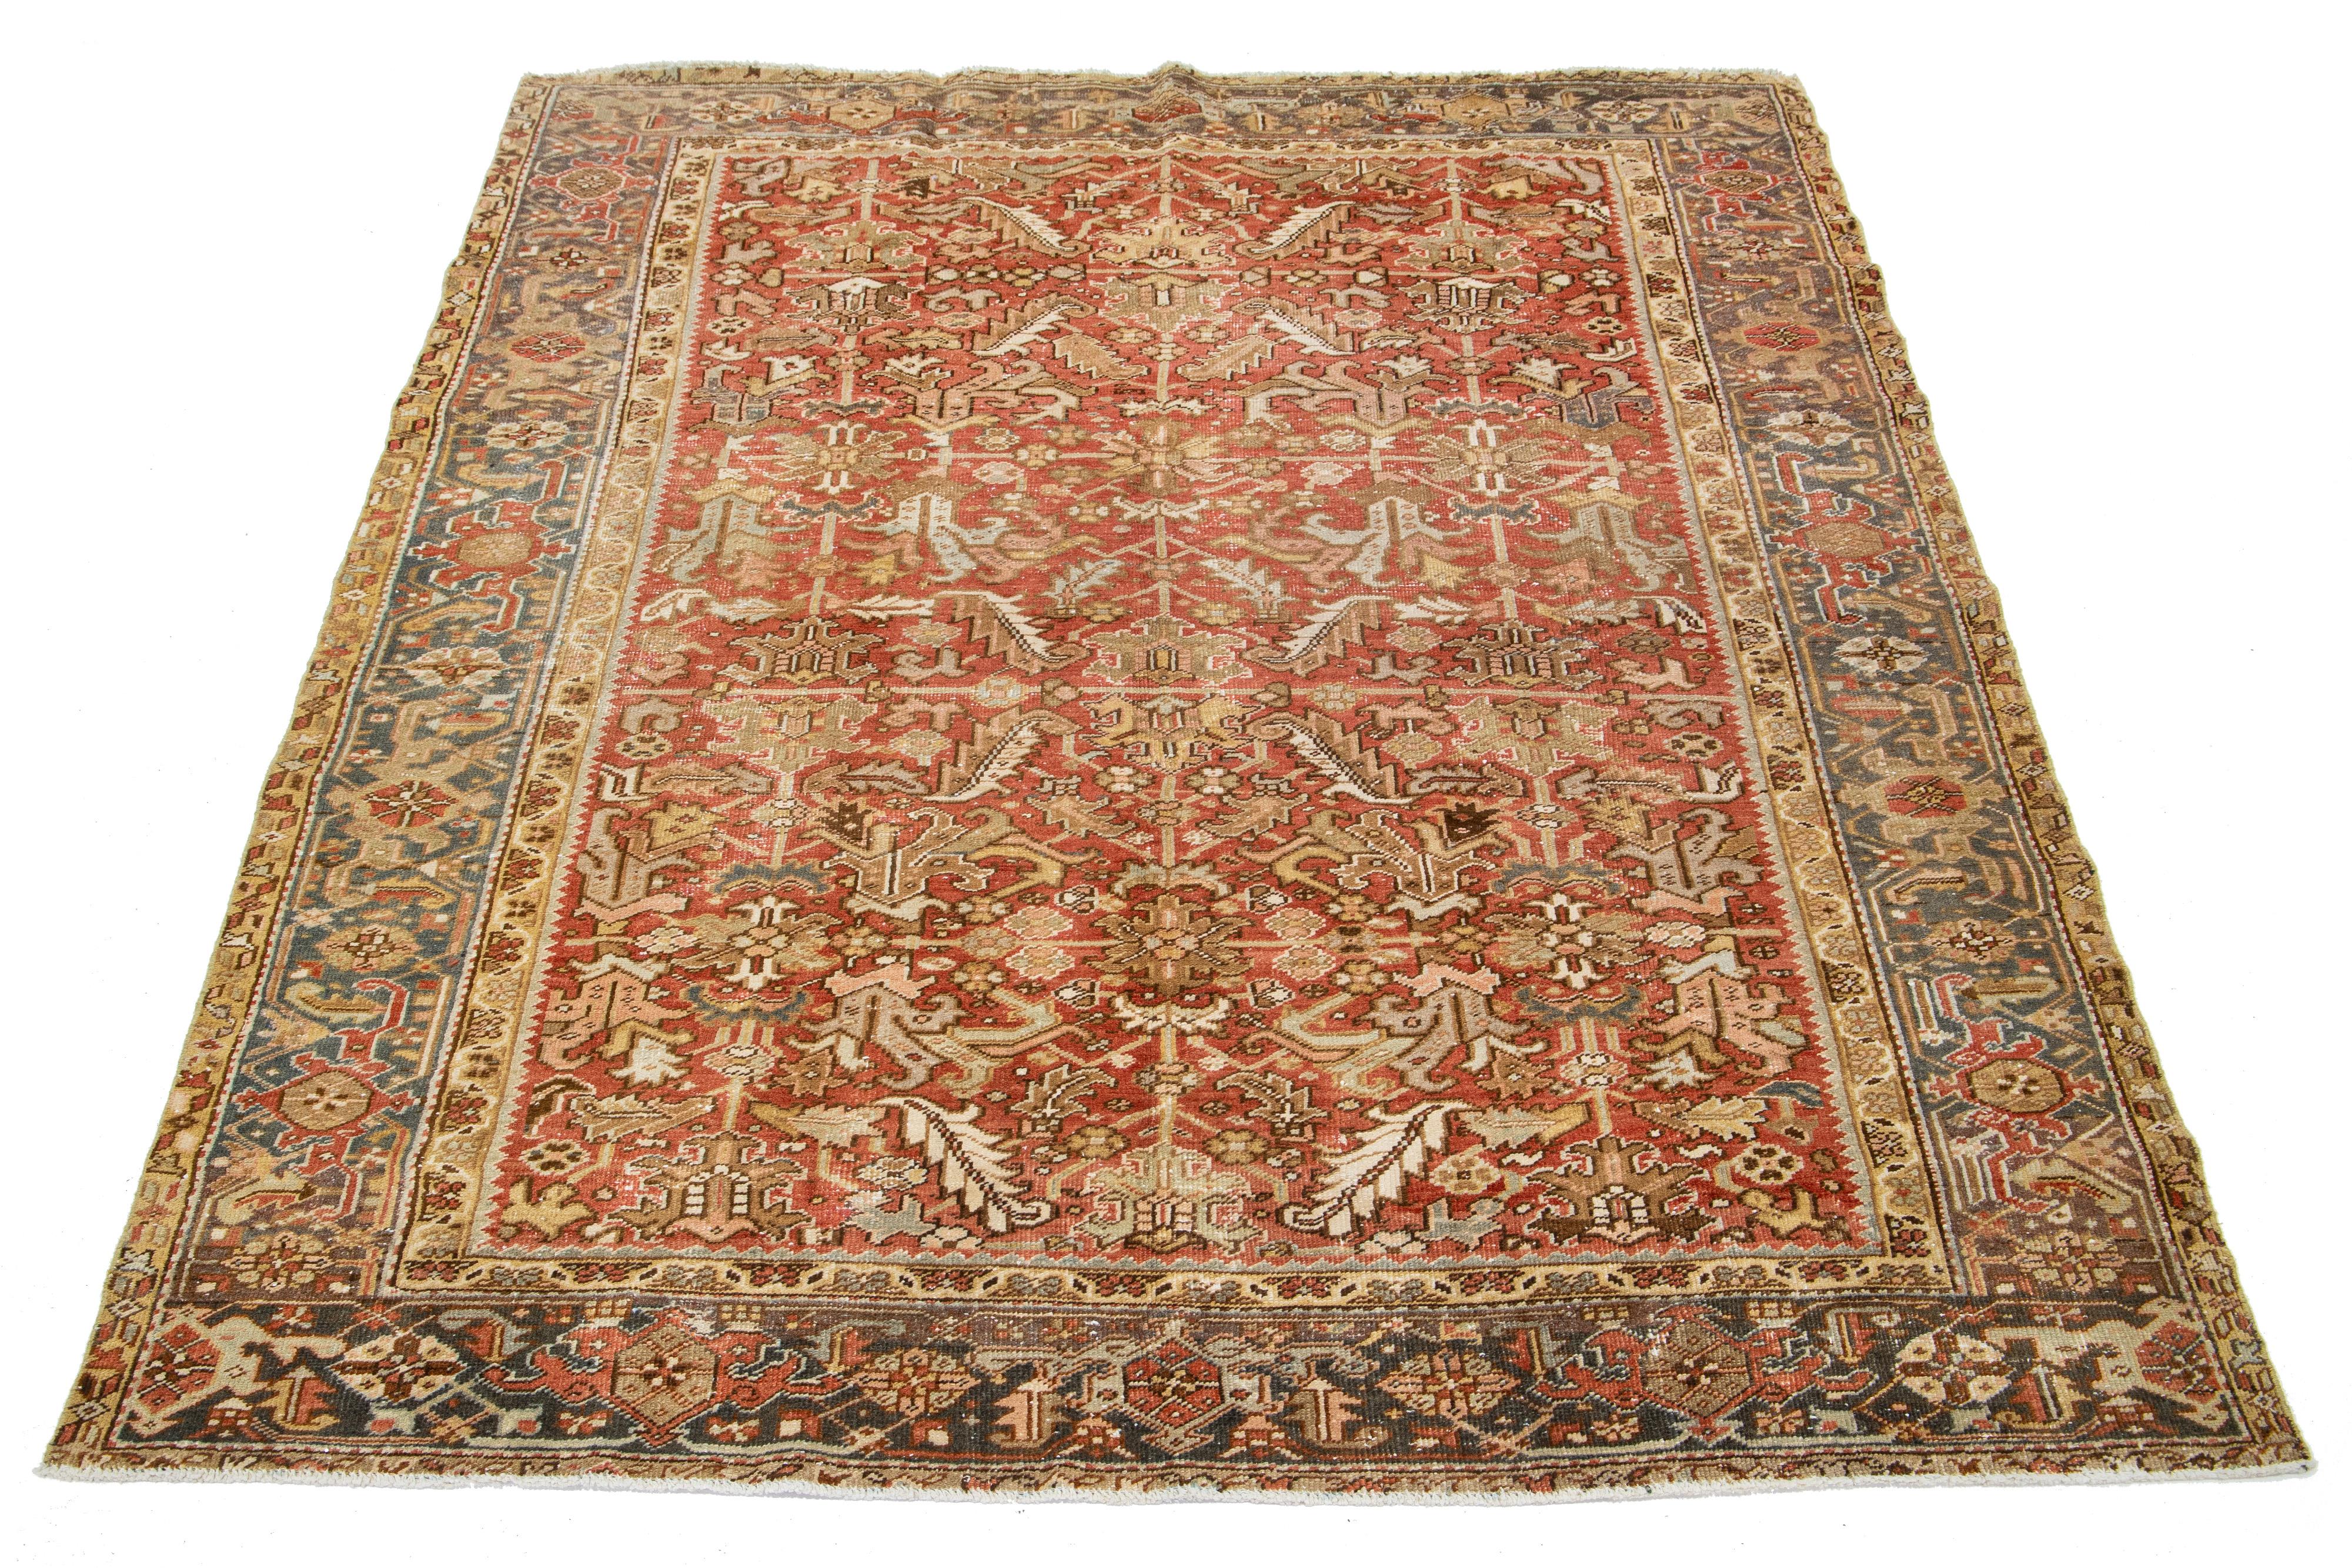 This antique Persian Heriz rug is crafted with hand-knotted wool. The rust-colored field features an allover design embellished with shades of peach, gray, and brown.

This rug measures 7'10